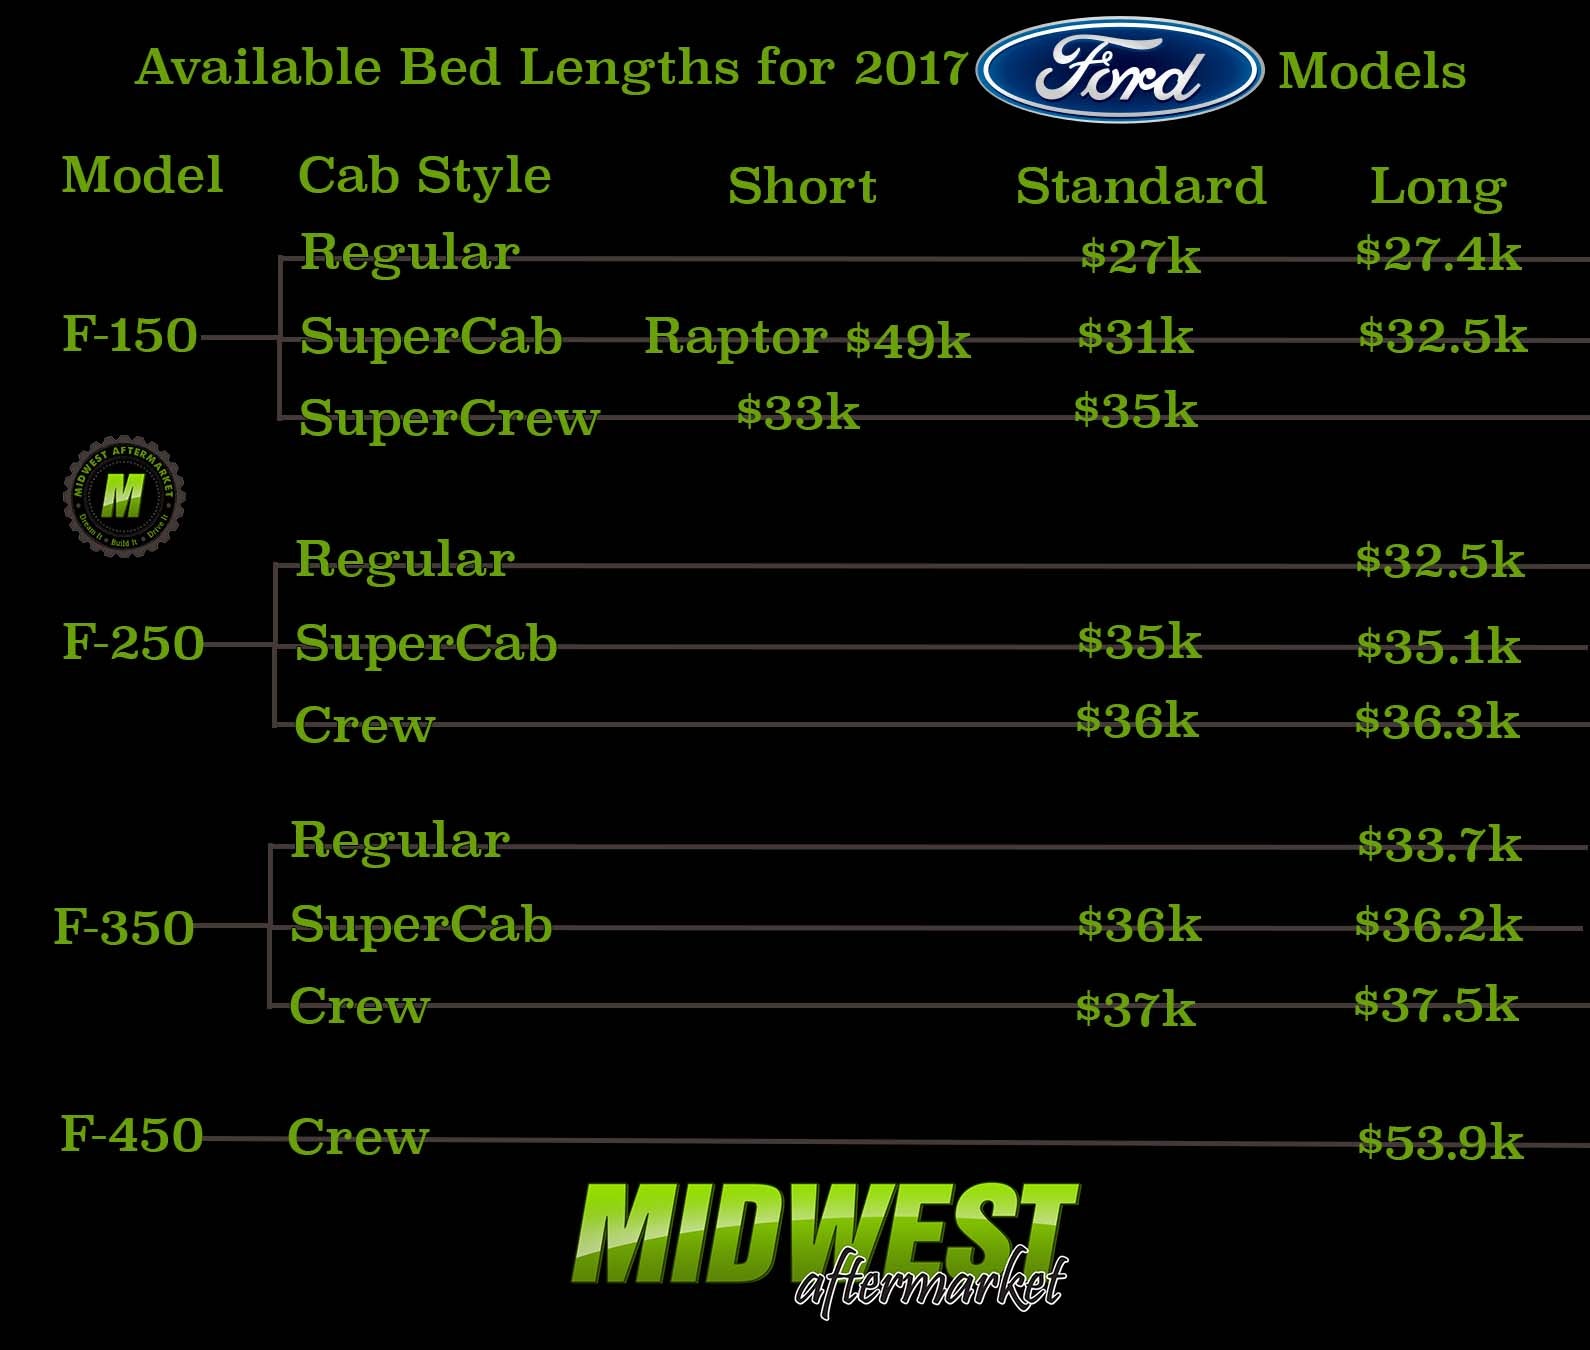 Ford Truck MSRP's and Bed Lengths Comparison